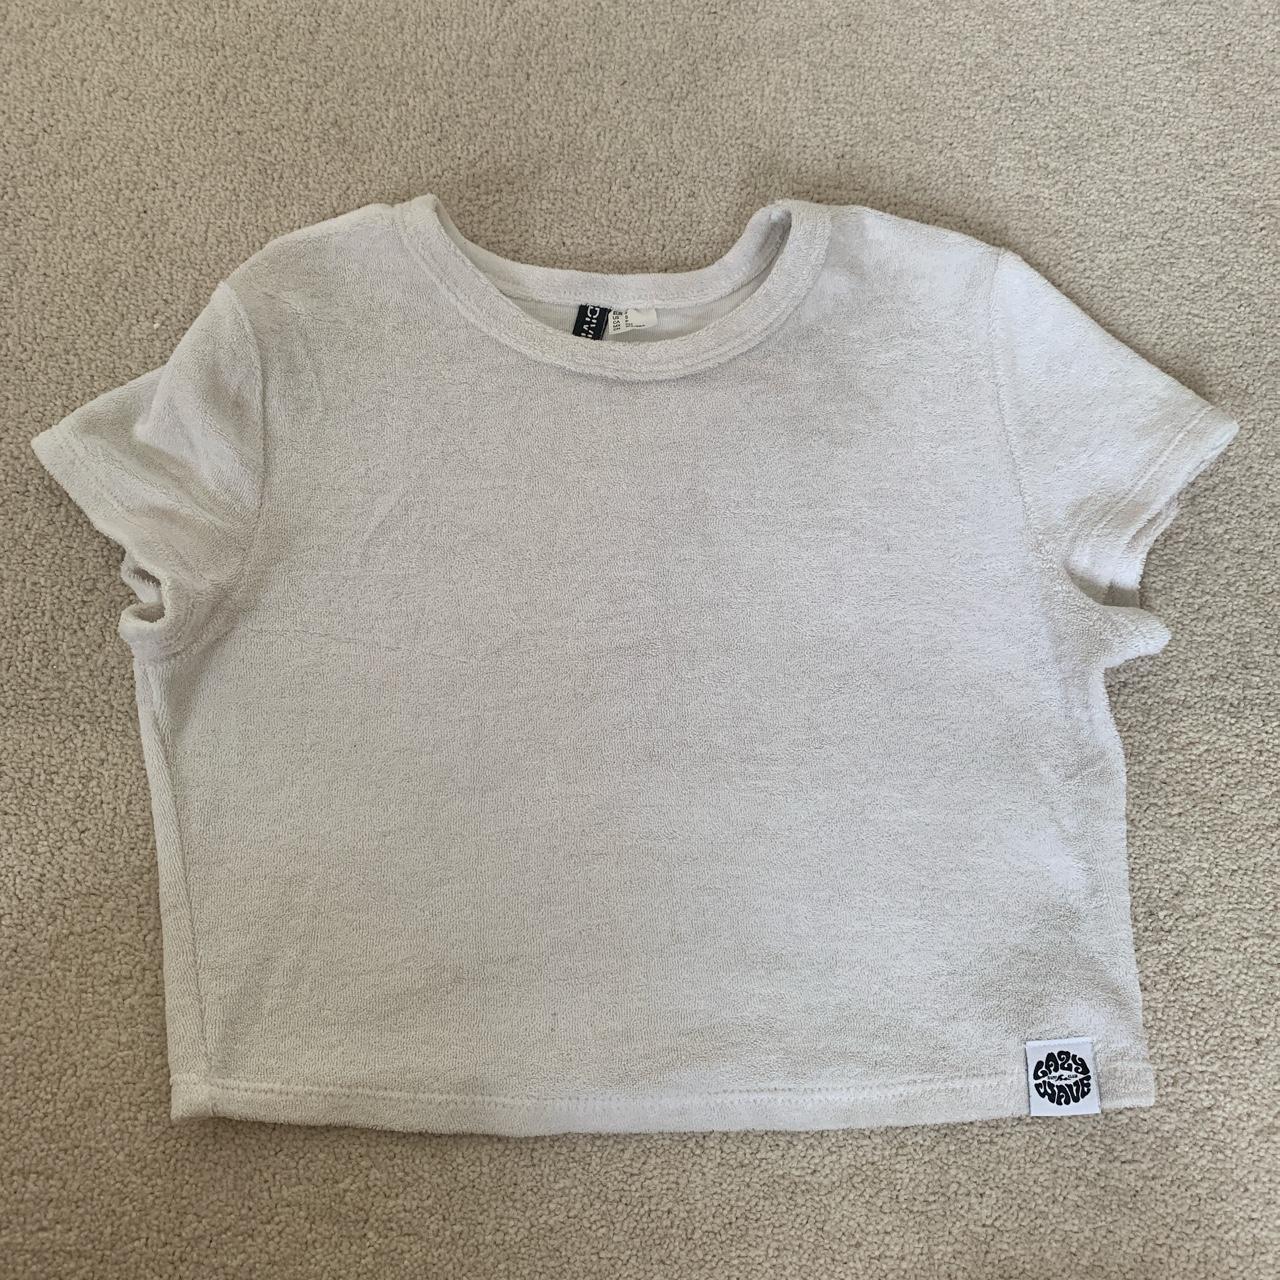 H&M terry tee T-shirt in white I am also selling... - Depop